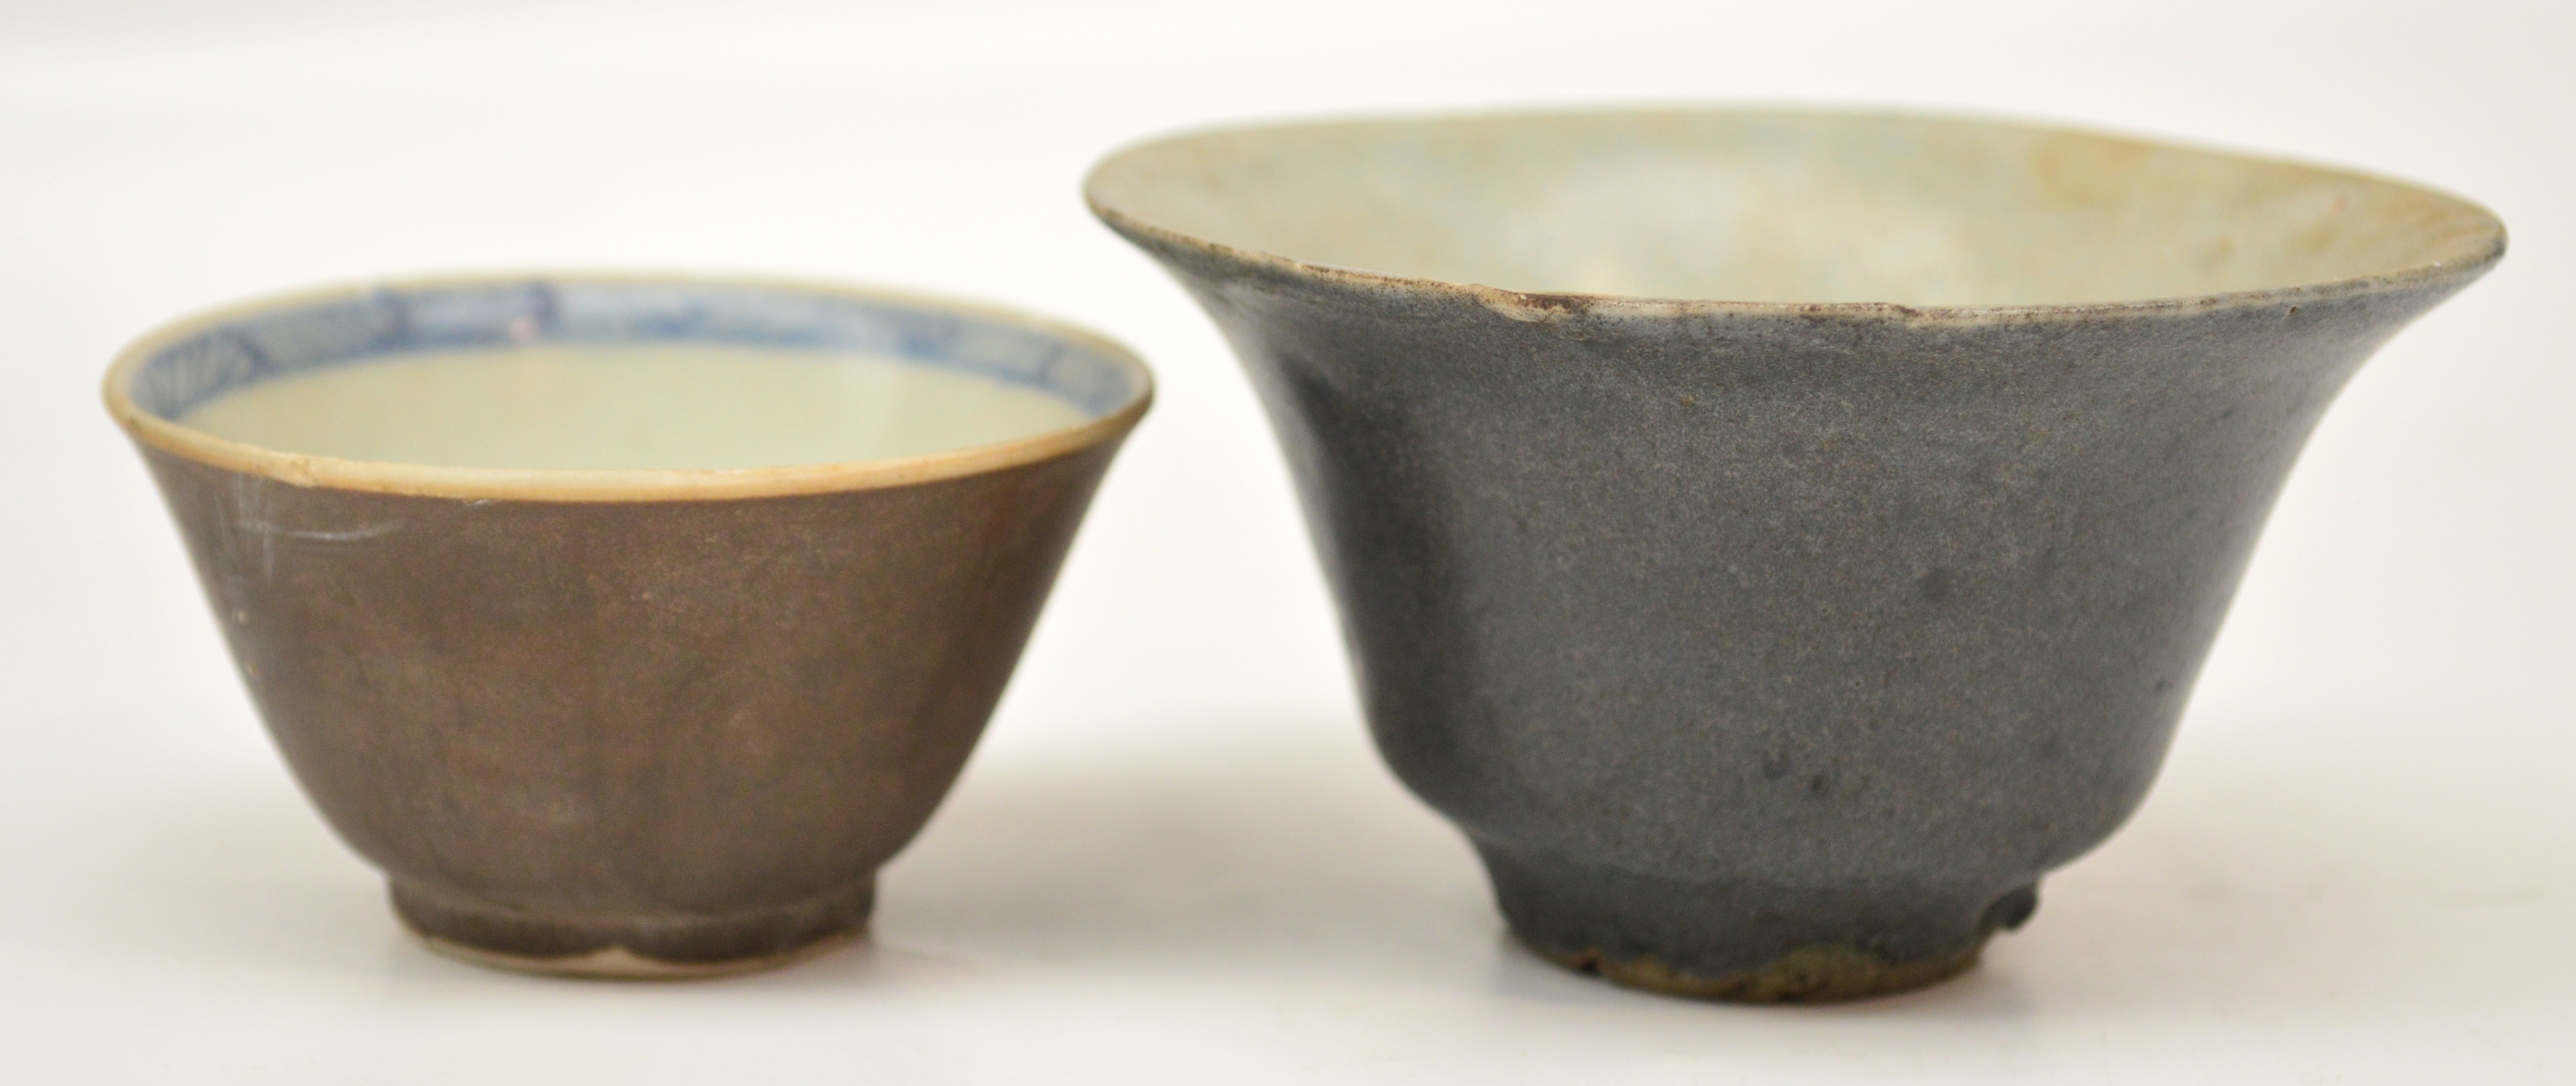 A rare Chinese Ming dynasty porcelain tea bowl glazed with cobalt blue, excavated from Palawan,